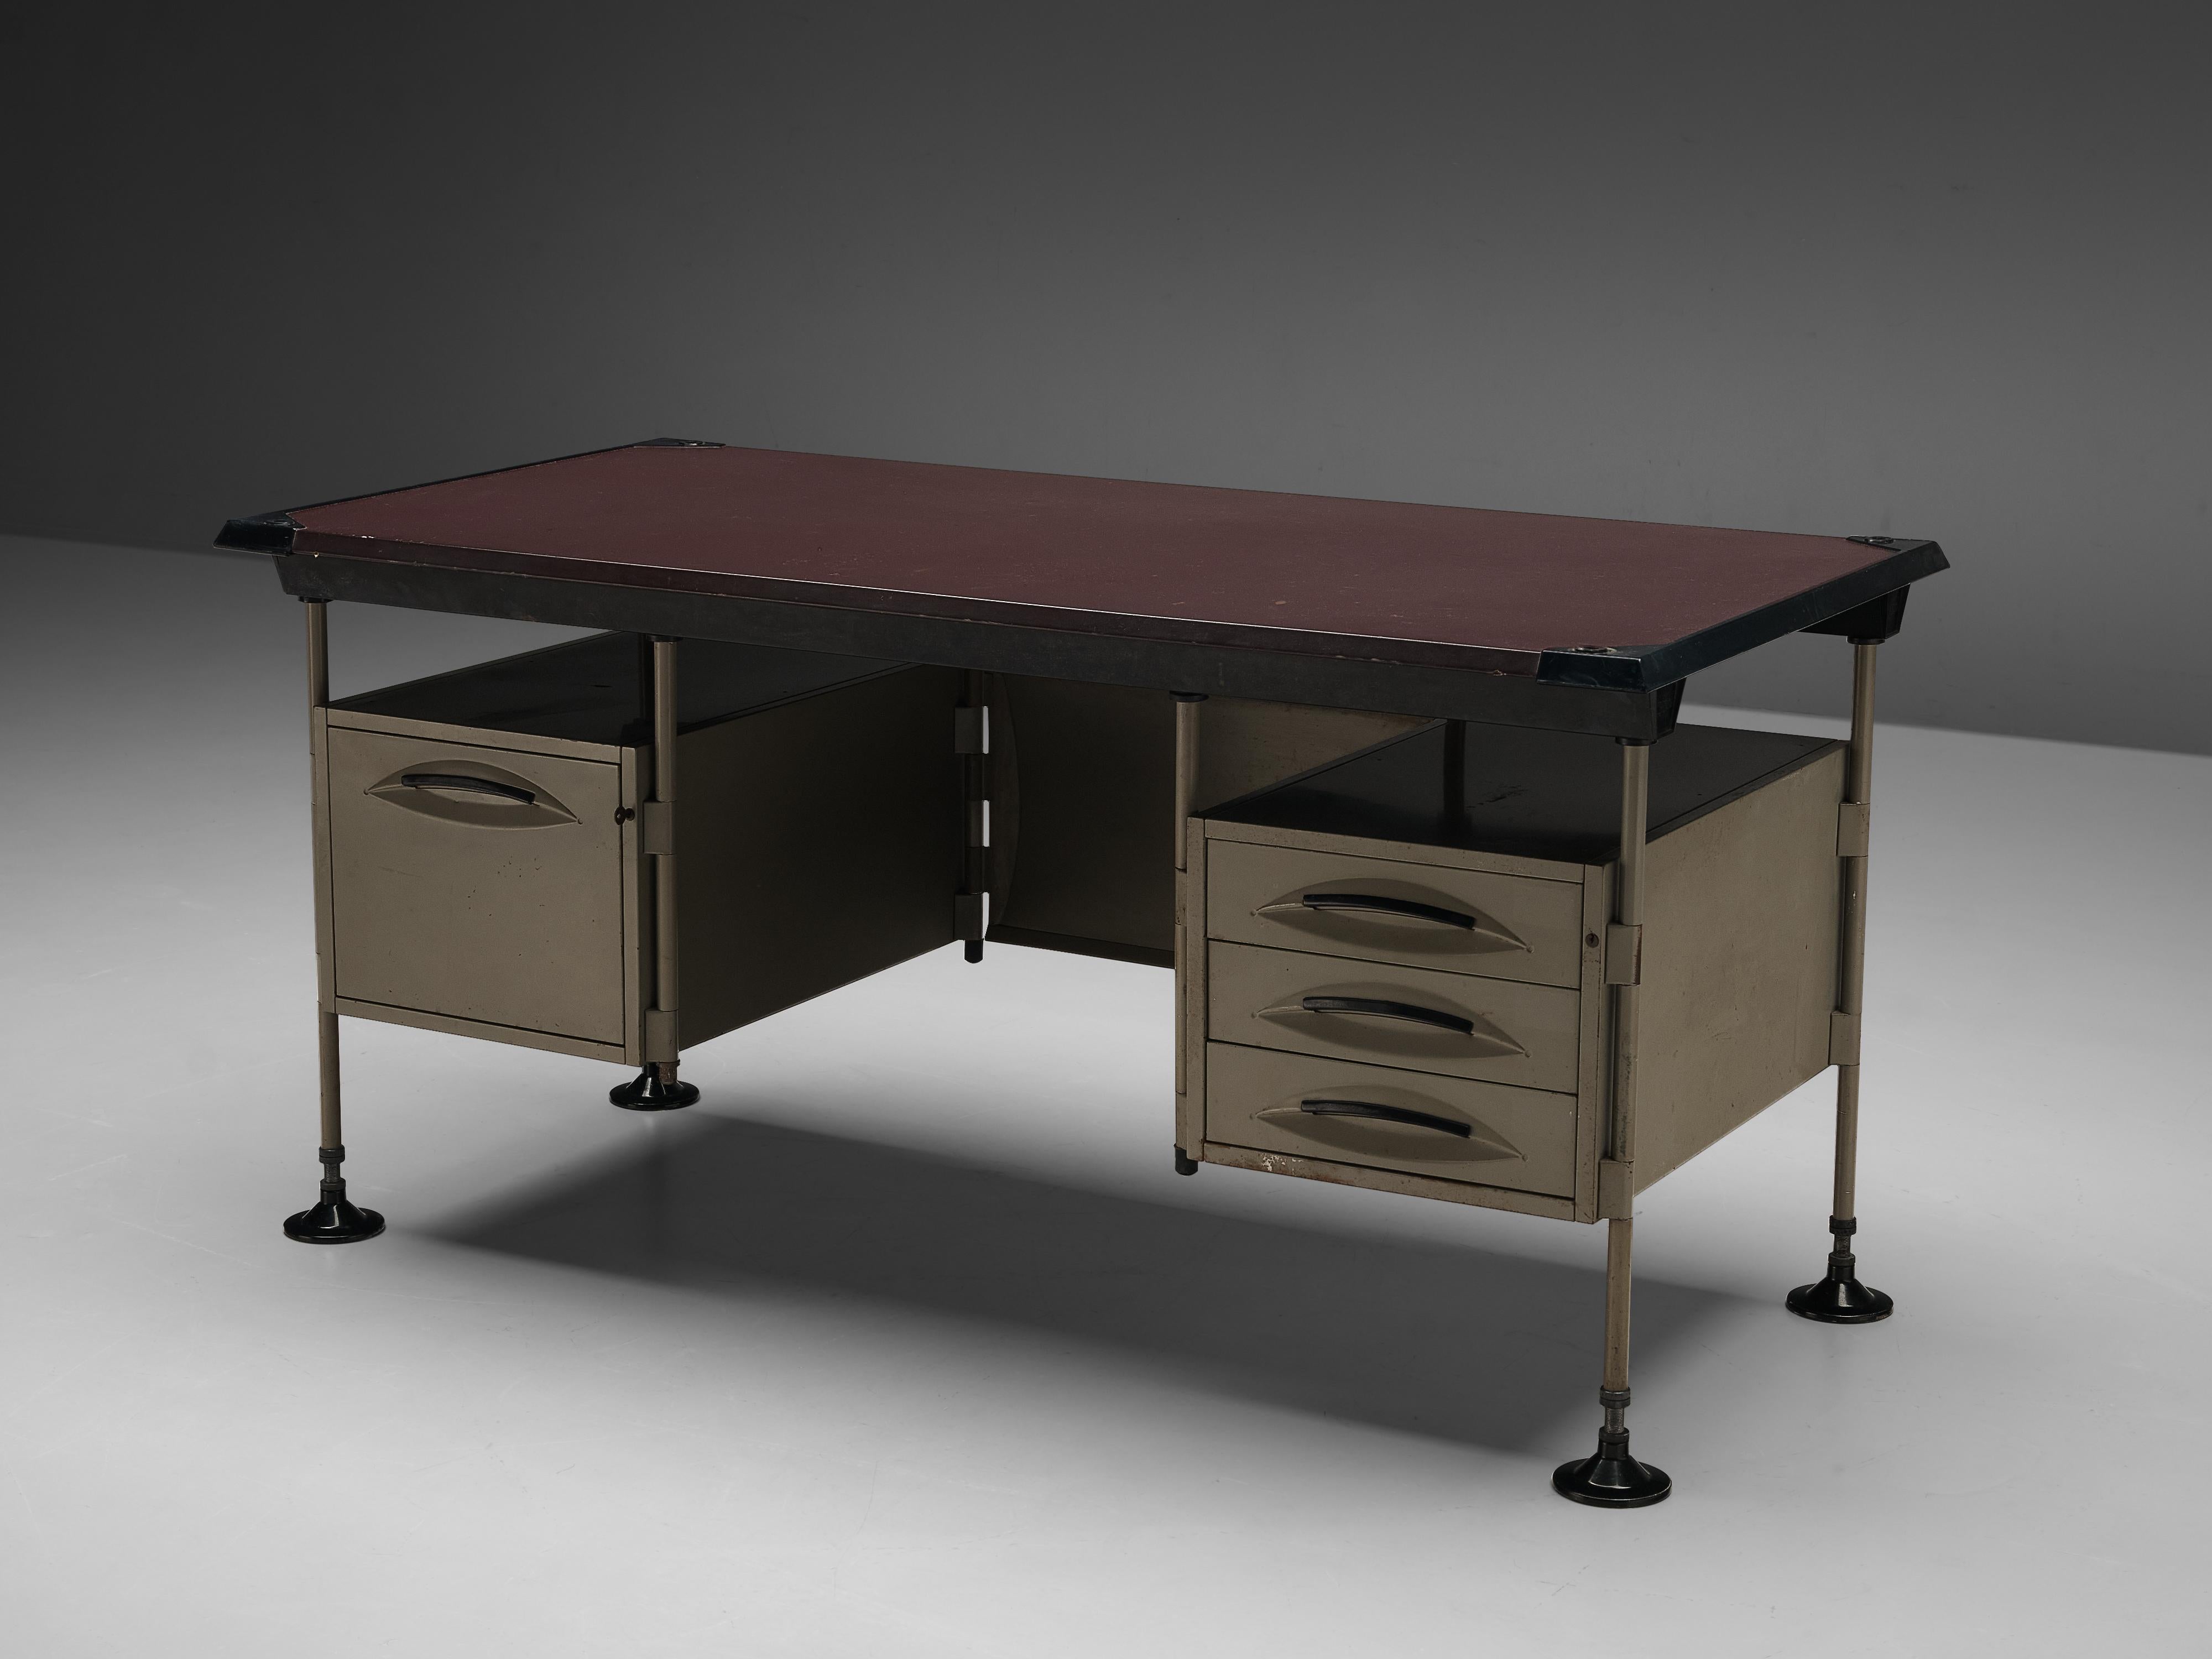 Studio BBPR for Olivetti, 'Spazio' desk with drawers, steel, vinyl, plastic, Italy, design 1959/60, production 1960s 

In 1954, Olivetti, the Italian office equipment manufacturer, hired BBPR to design their New York showroom on Fifth Avenue and to